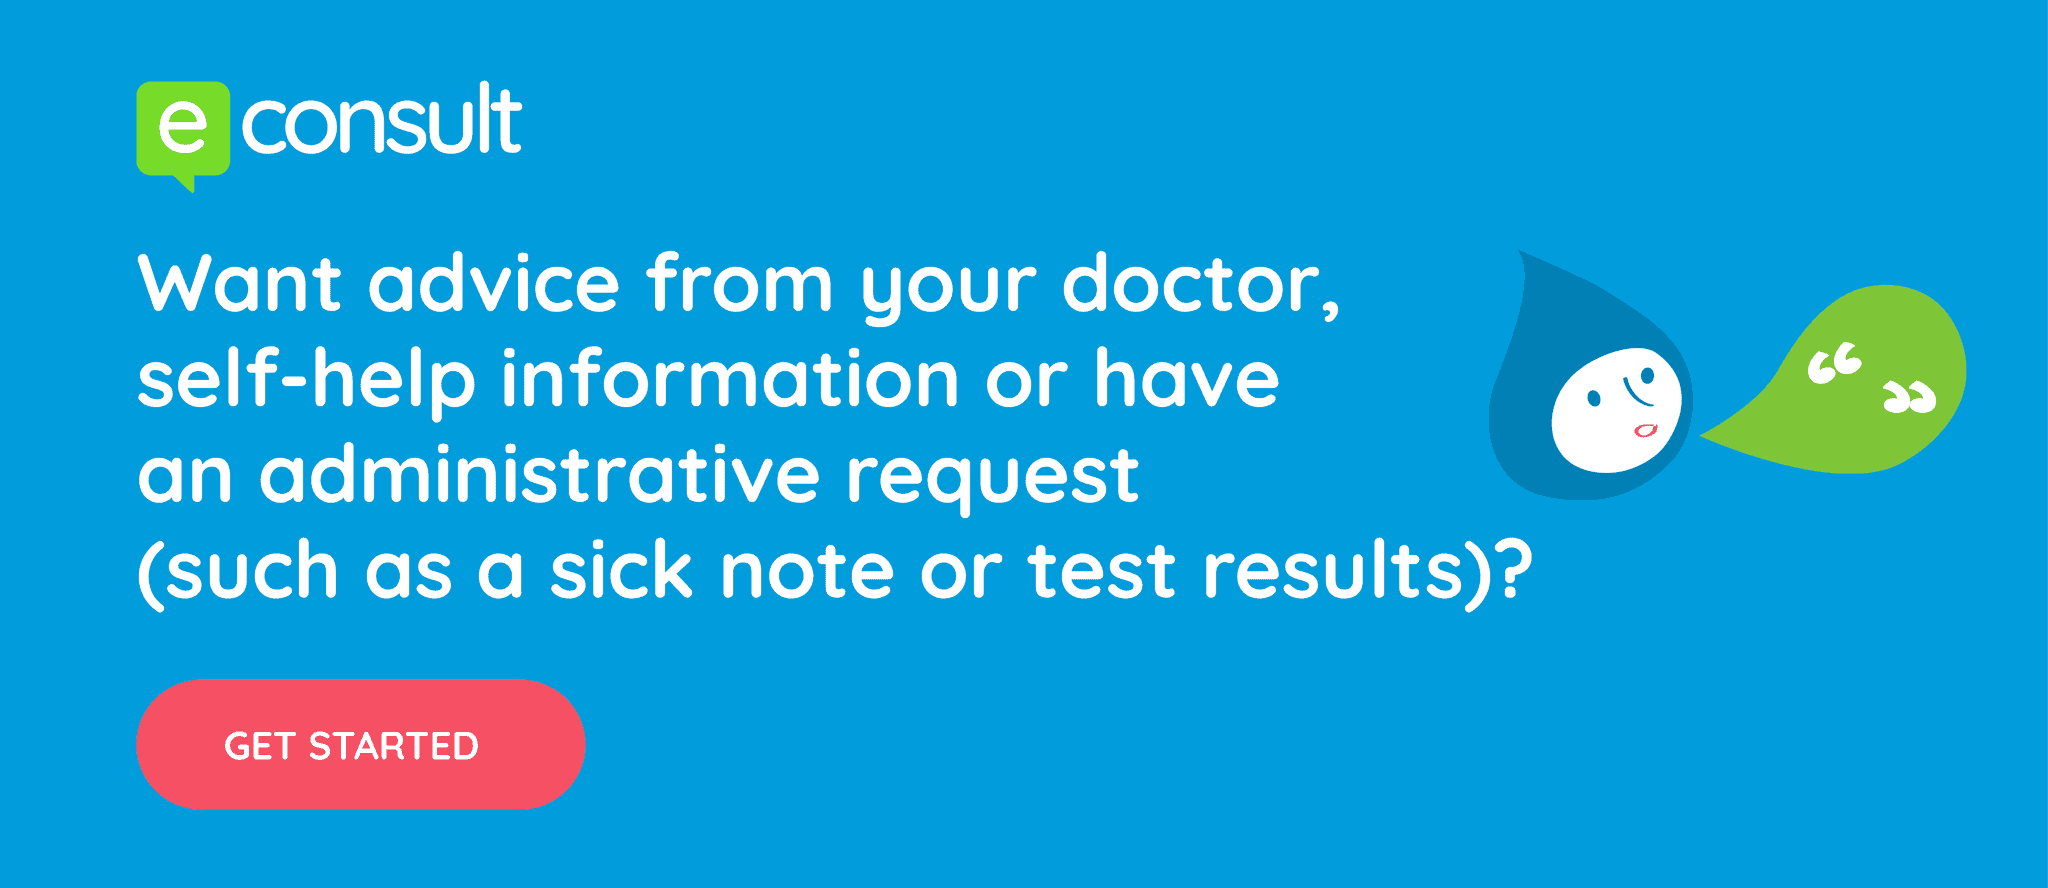 Want advice from your doctor?